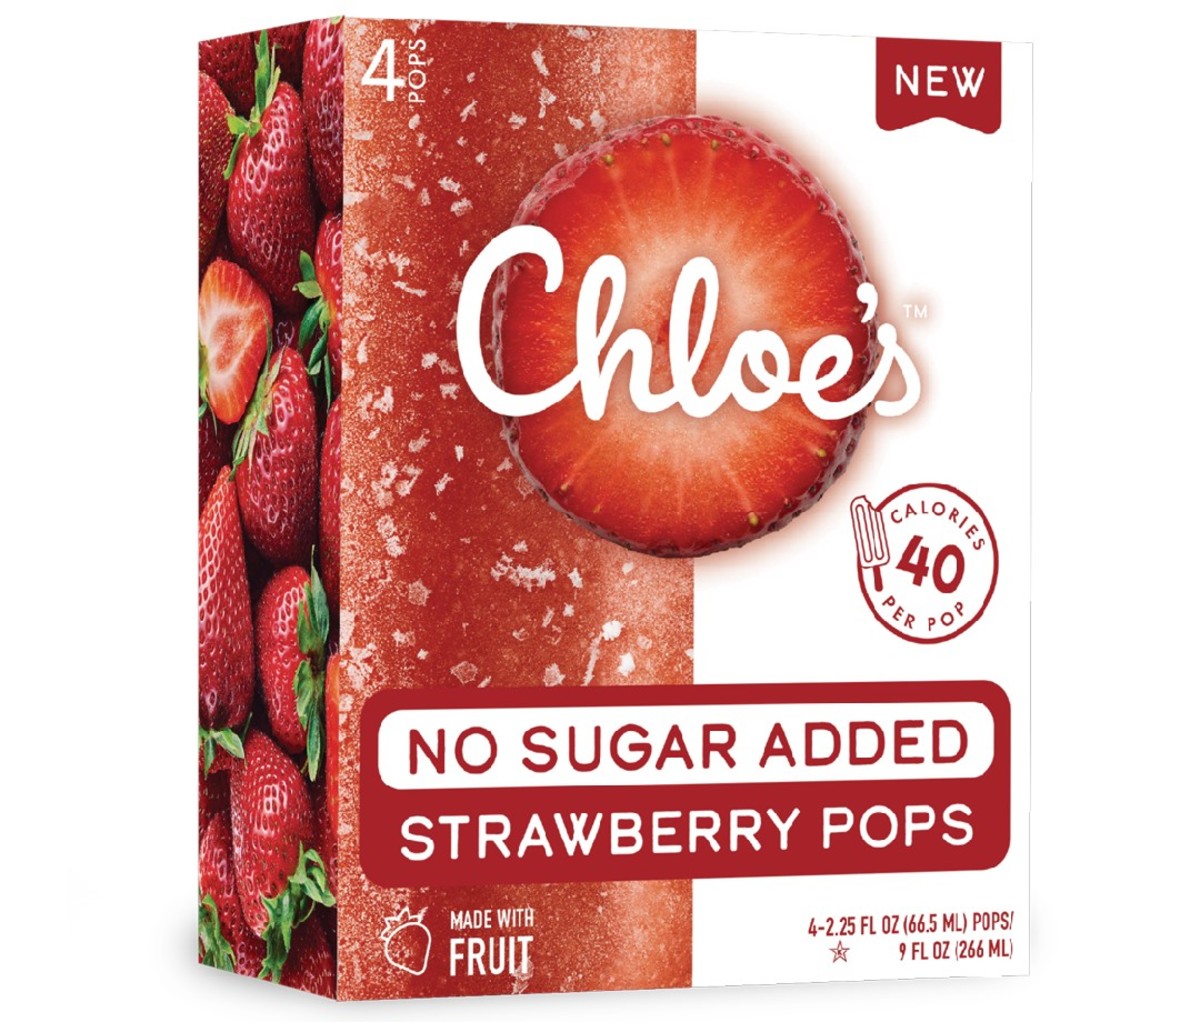 With Chloe's, you can treat yourself, cool off, and feel great while doing so because their pops are made with only the simplest ingredients. They have a wide range of fruit pops made with just fruit, water and cane sugar. Chloe's Pops are always dairy-free, plant-based, Non-GMO Project Verified, gluten-free, kosher and most importantly, delicious!